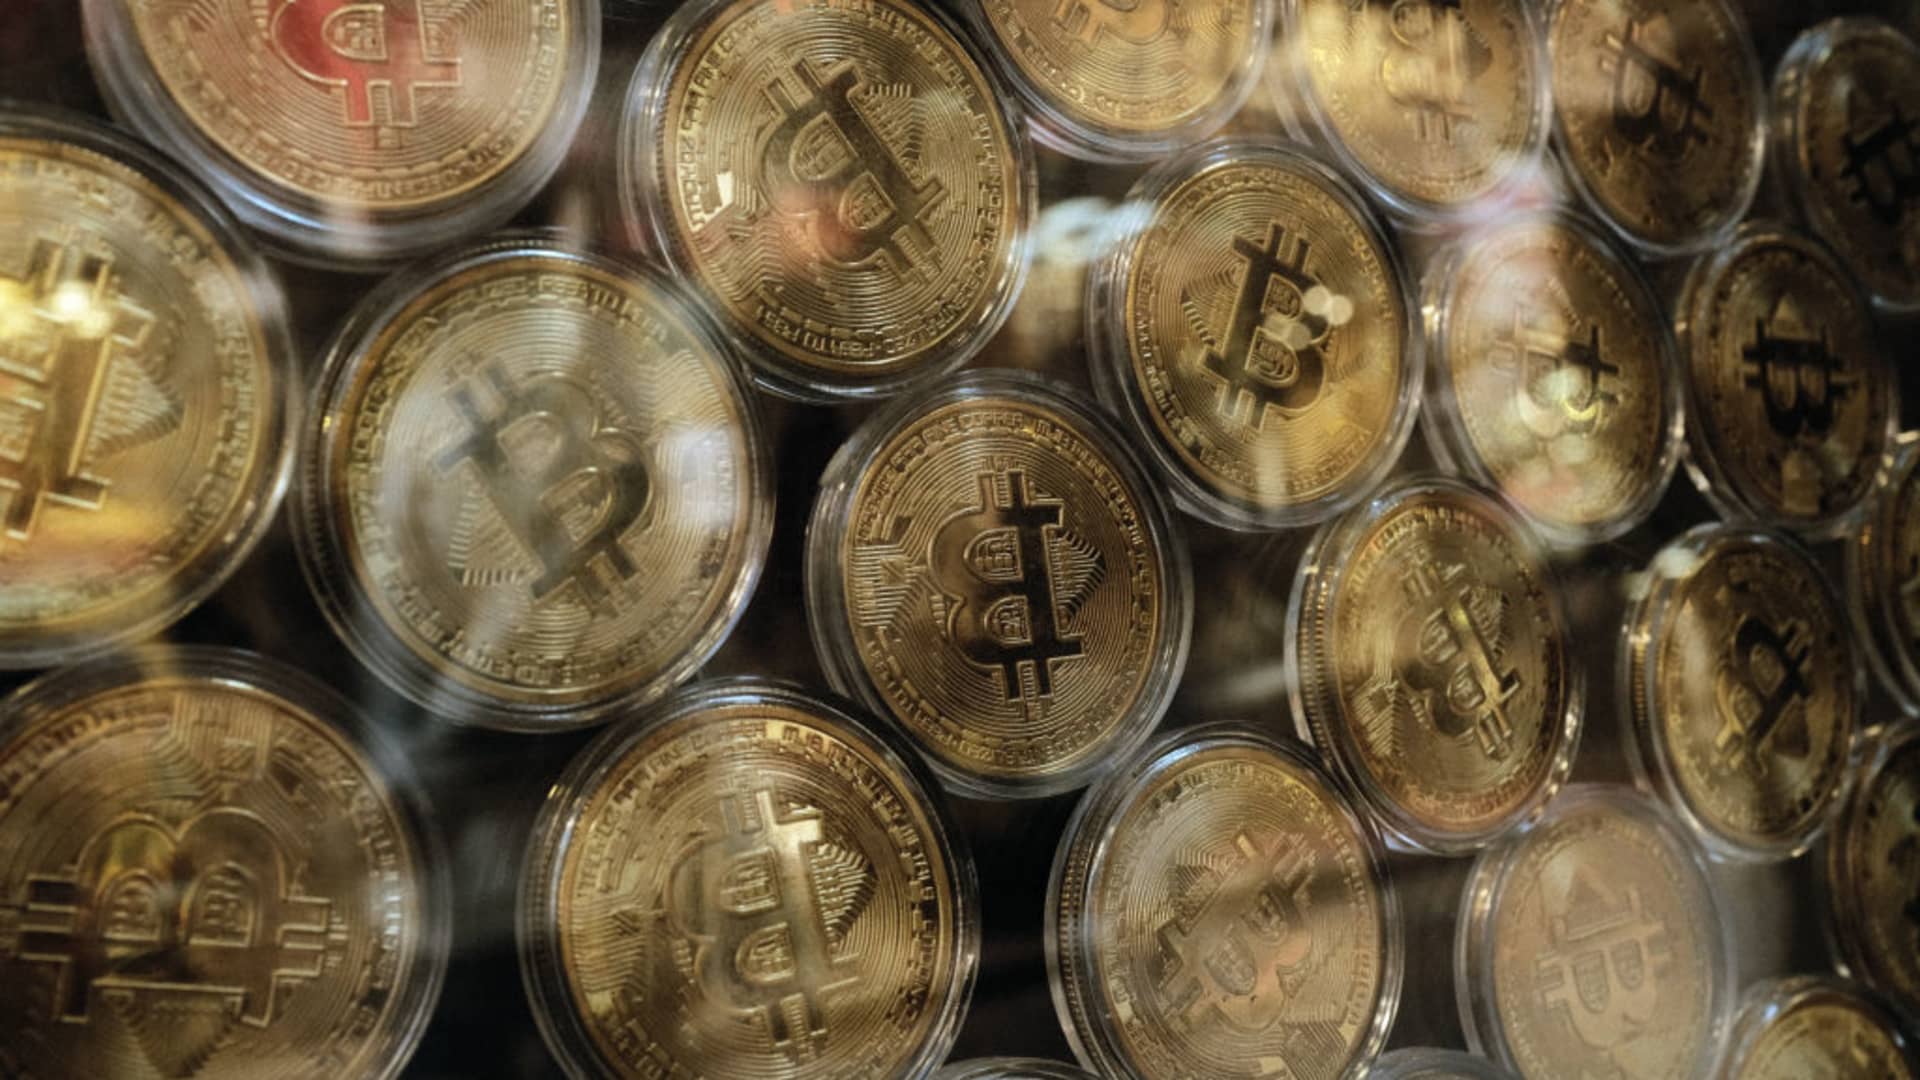 Bitcoin is in the depths of the summer doldrums despite a wave of positive regulatory developments. Here's what to expect in August.